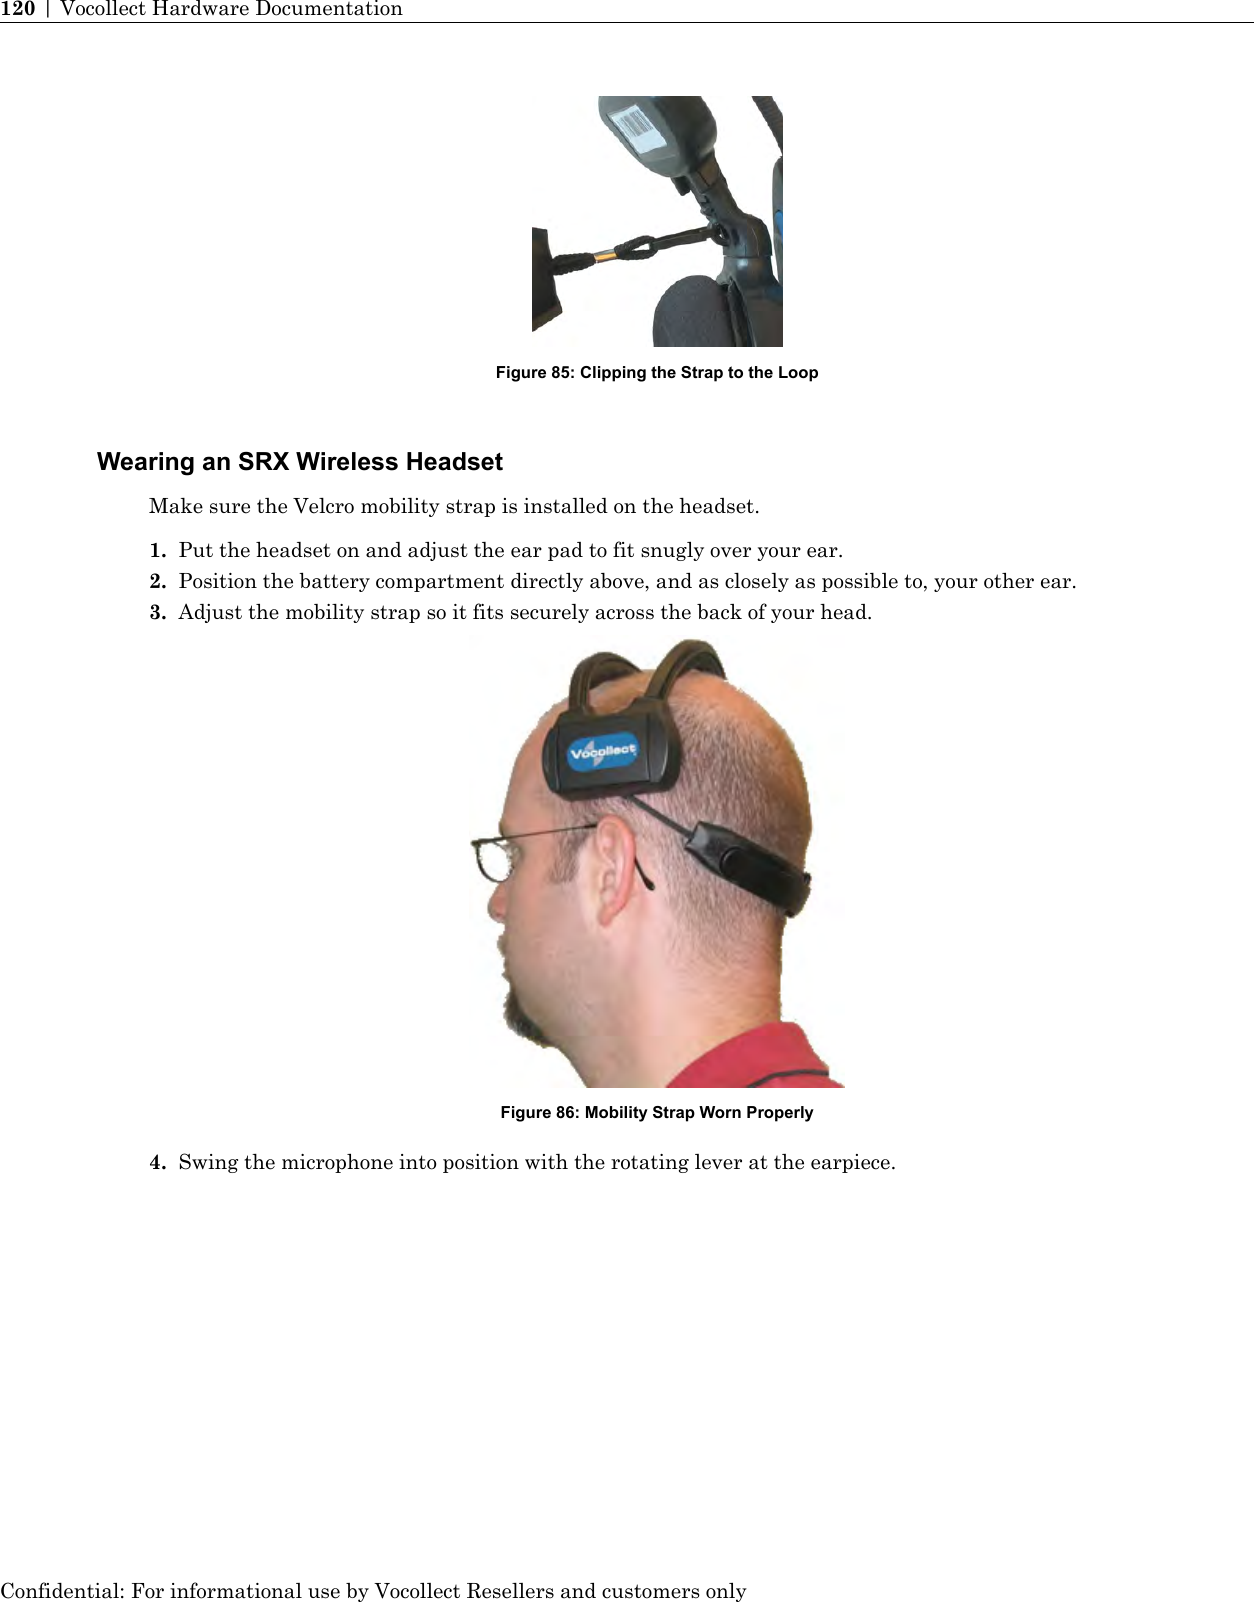 Figure 85: Clipping the Strap to the LoopWearing an SRX Wireless HeadsetMake sure the Velcro mobility strap is installed on the headset.1. Put the headset on and adjust the ear pad to fit snugly over your ear.2. Position the battery compartment directly above, and as closely as possible to, your other ear.3. Adjust the mobility strap so it fits securely across the back of your head.Figure 86: Mobility Strap Worn Properly4. Swing the microphone into position with the rotating lever at the earpiece.Confidential: For informational use by Vocollect Resellers and customers only120 | Vocollect Hardware Documentation